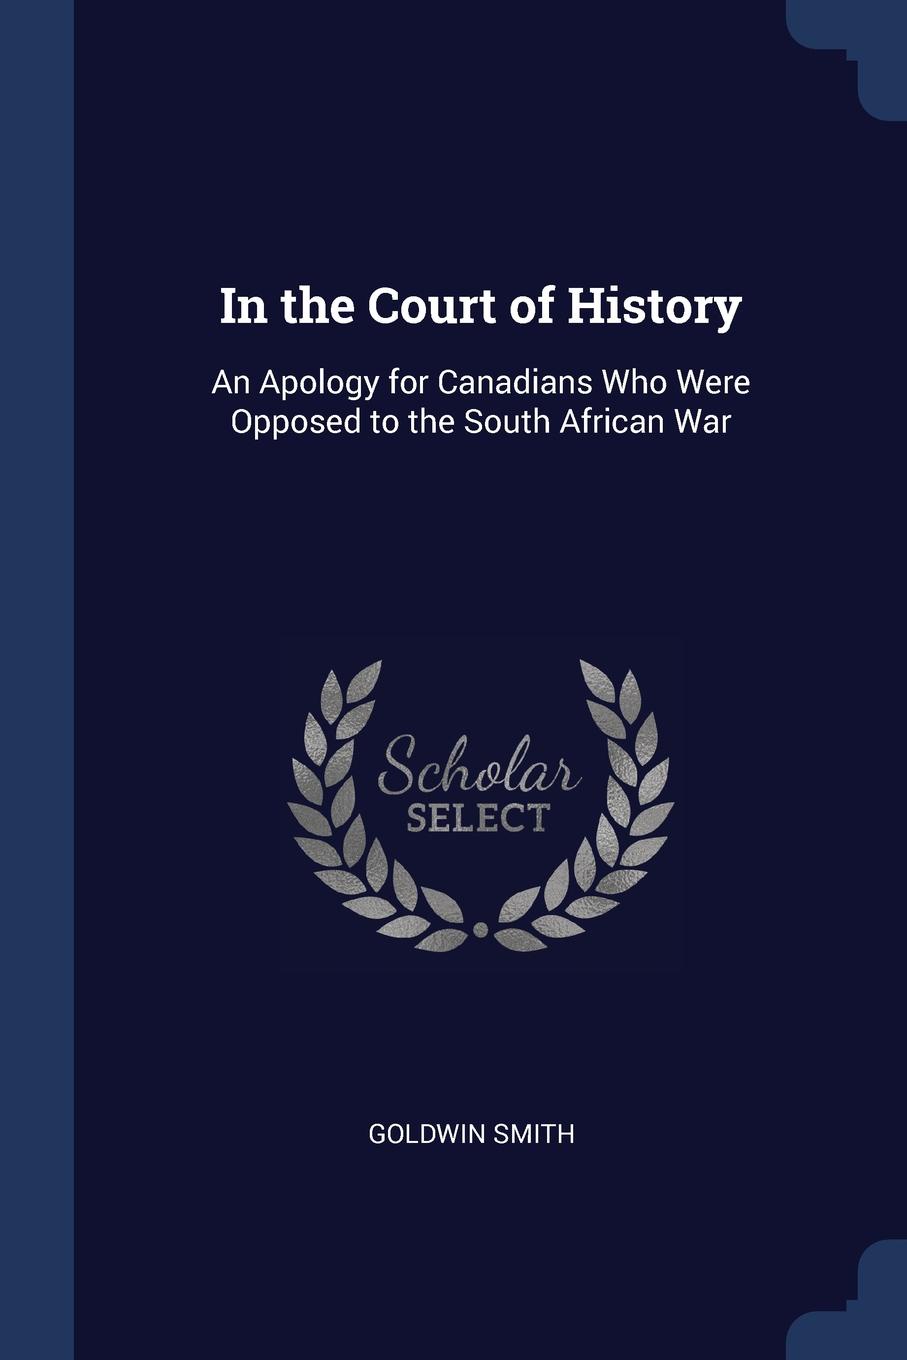 In the Court of History. An Apology for Canadians Who Were Opposed to the South African War